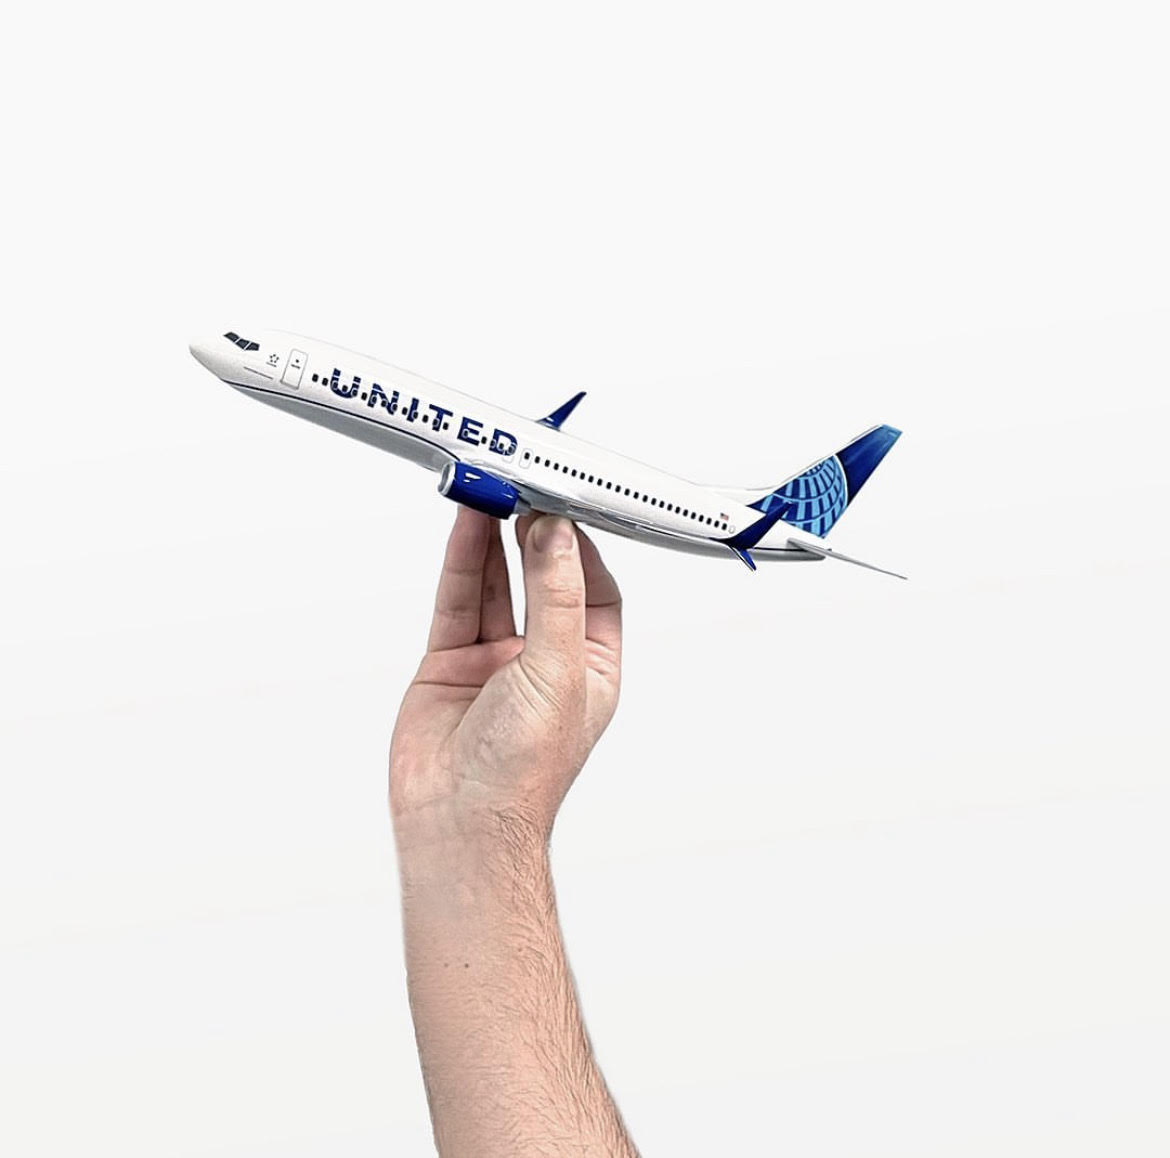 United Airlines orders 100 Boeing 737 MAX jets and a record-setting 100 Boeing 787 Dreamliners.